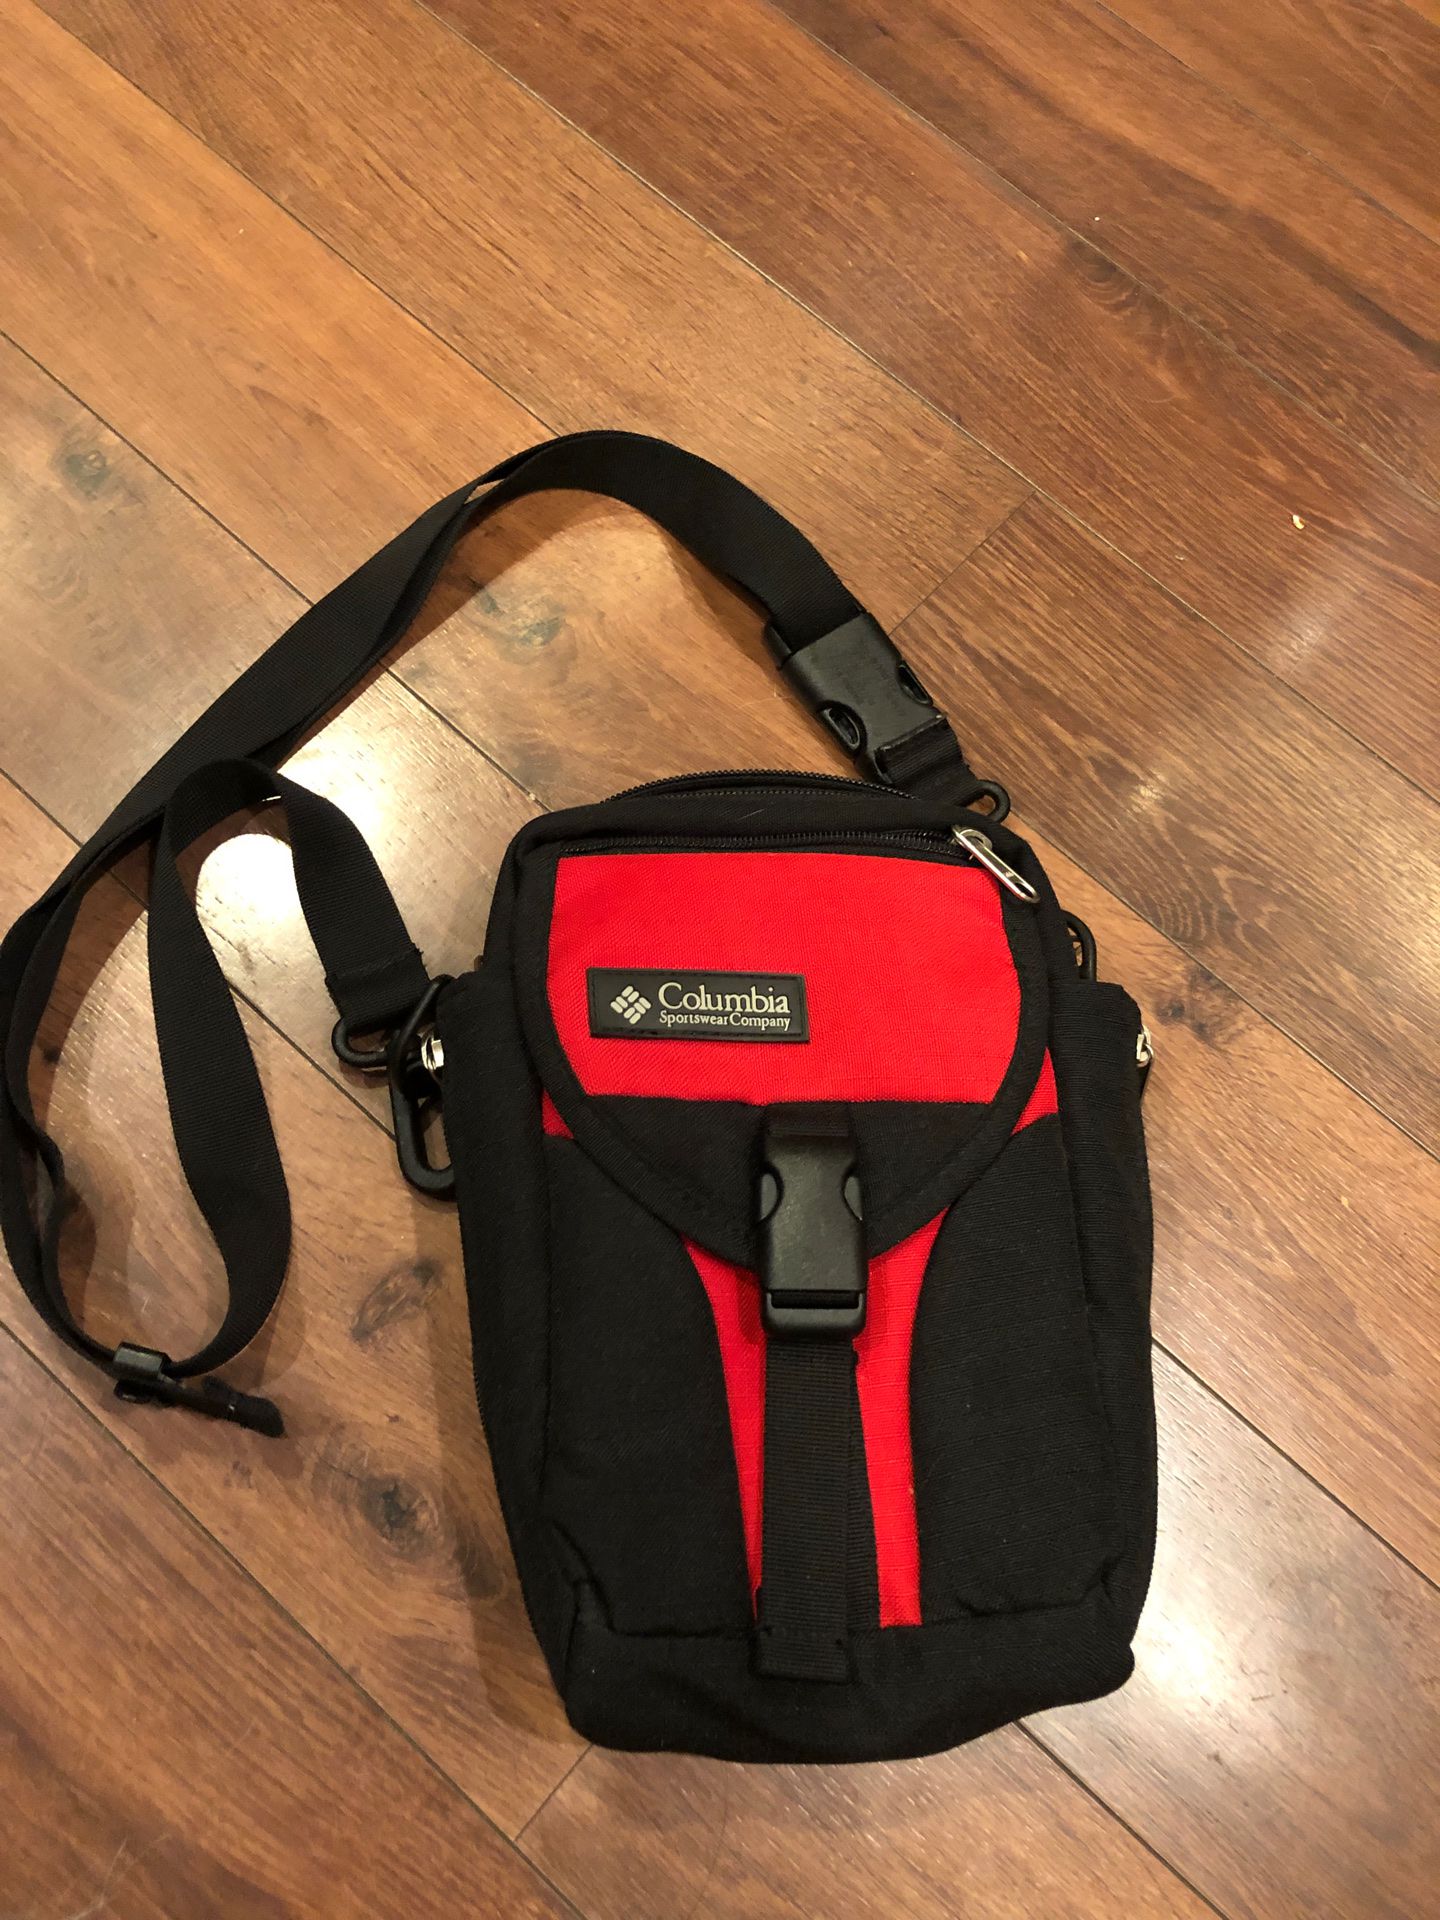 New Columbia Crossbody bag with lots of pockets